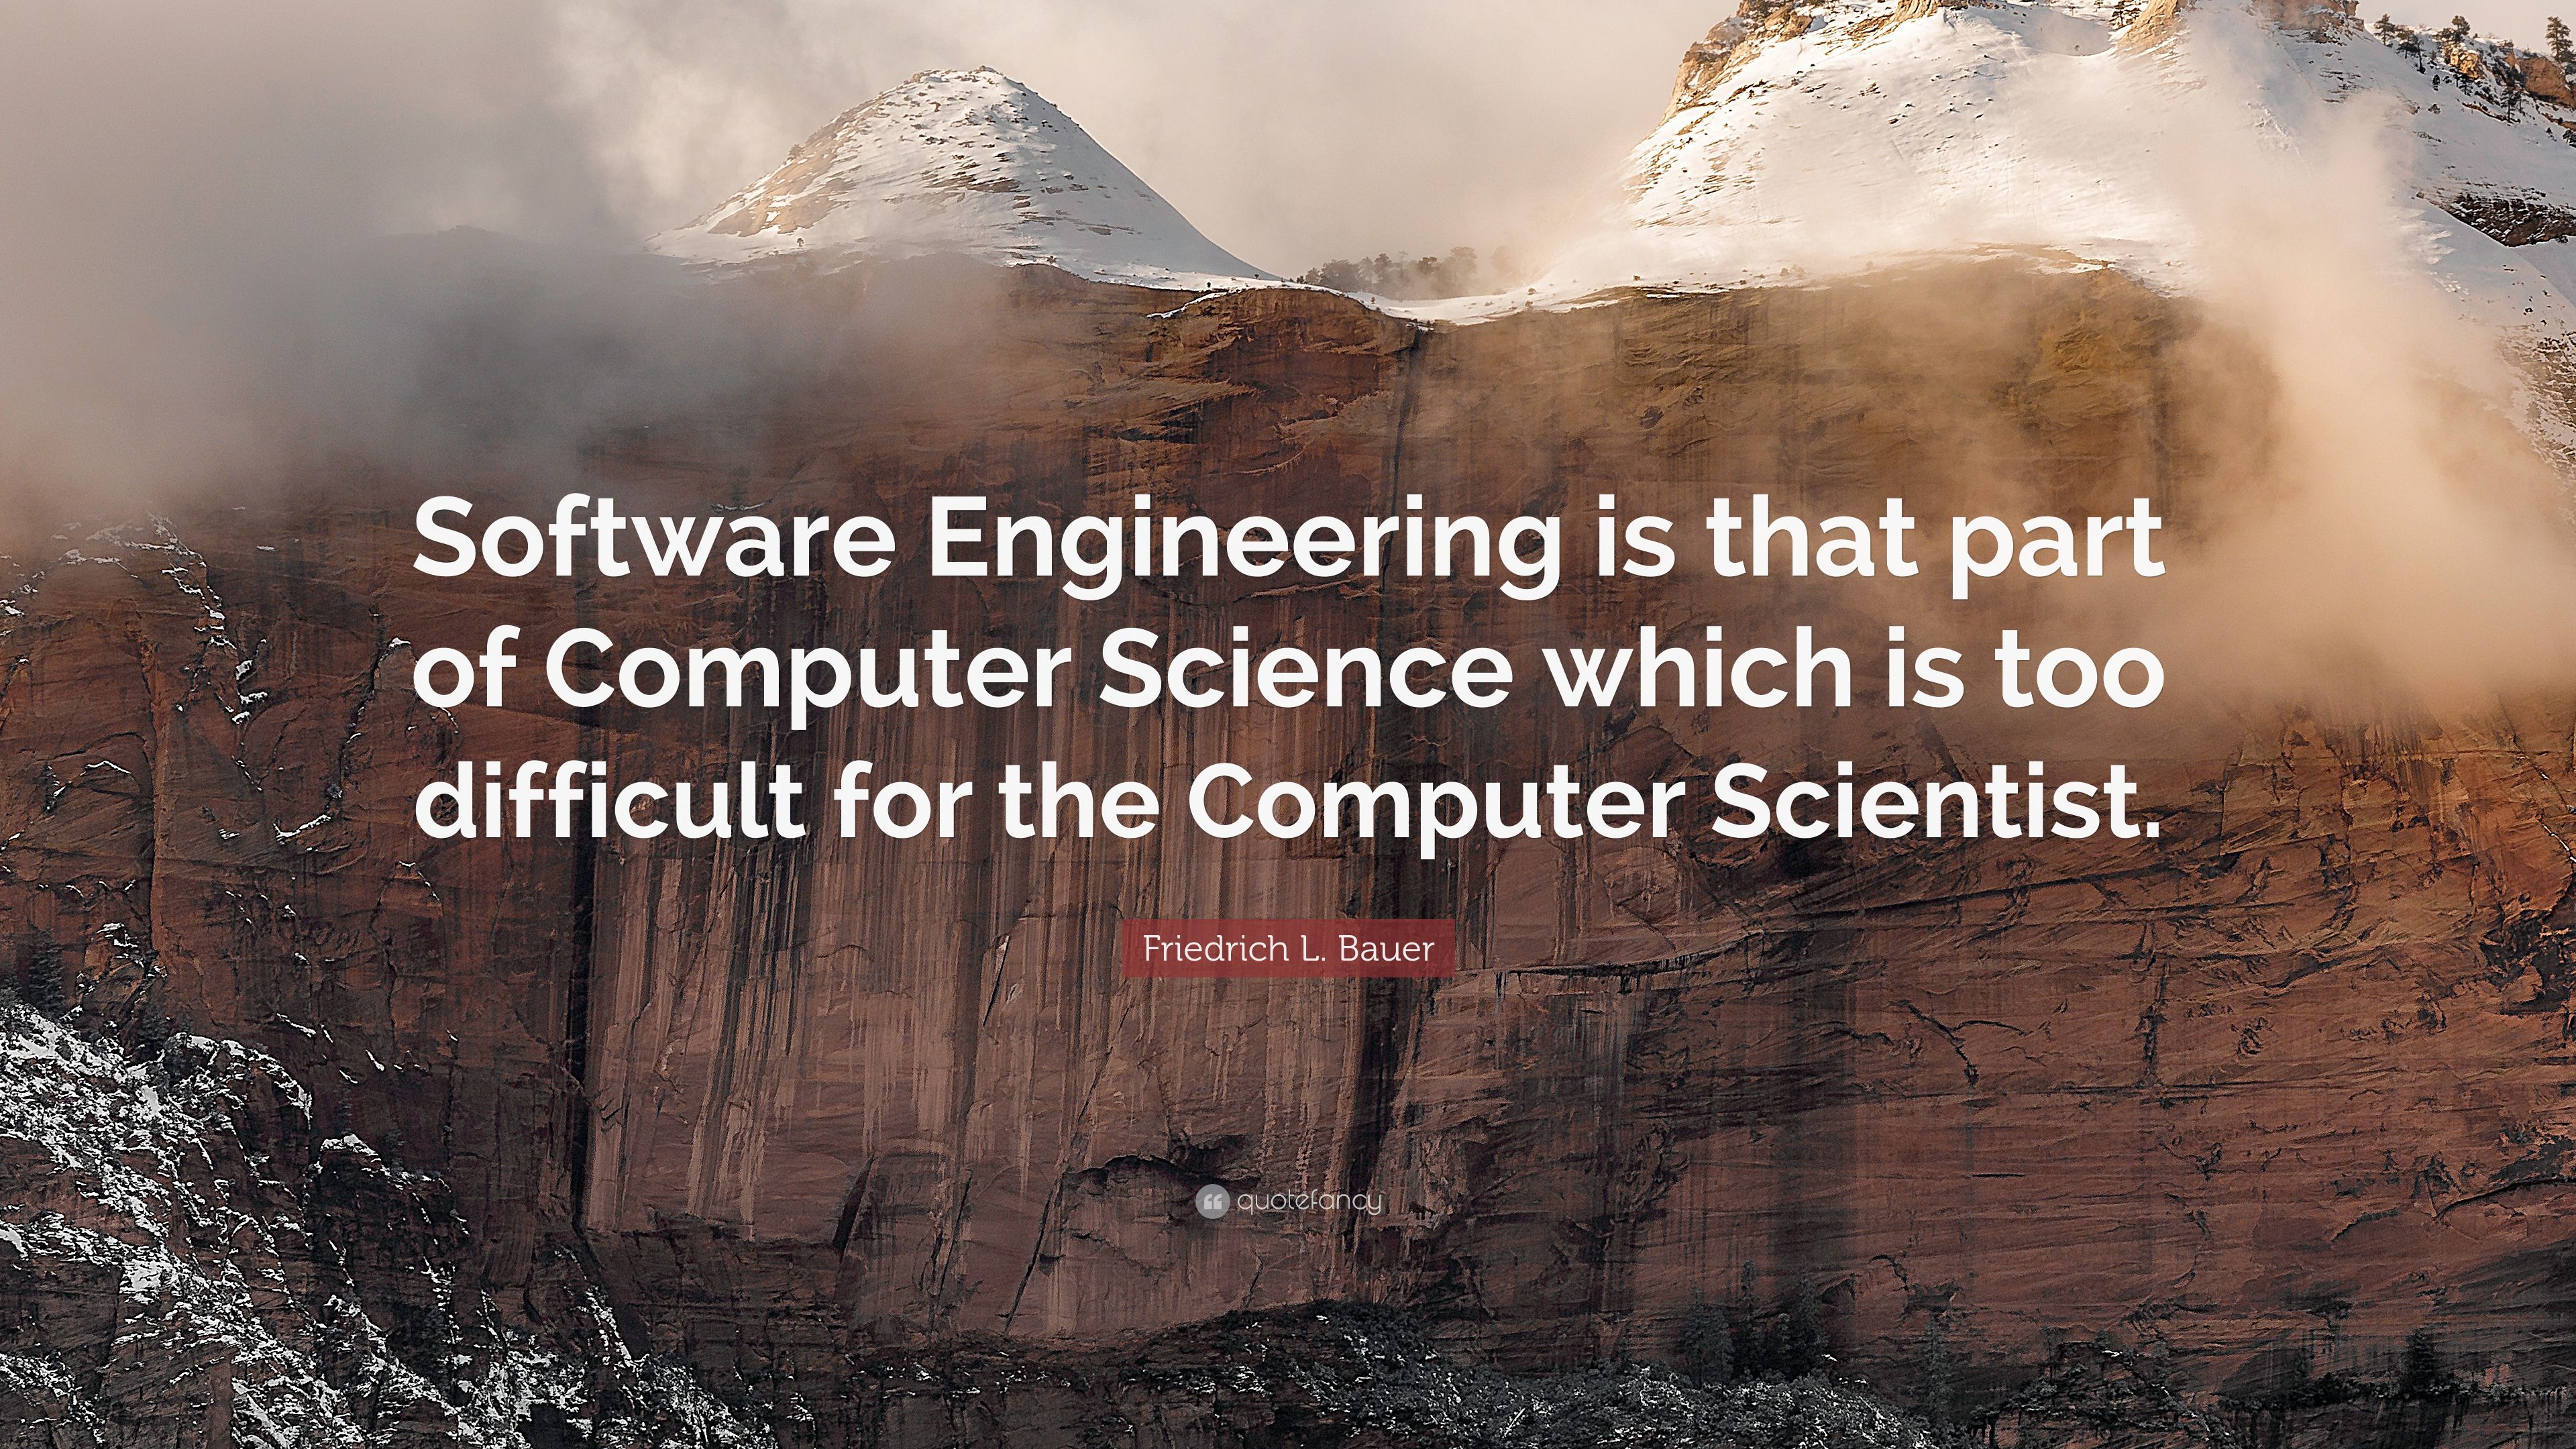 Friedrich L. Bauer Quote: “Software Engineering is that part